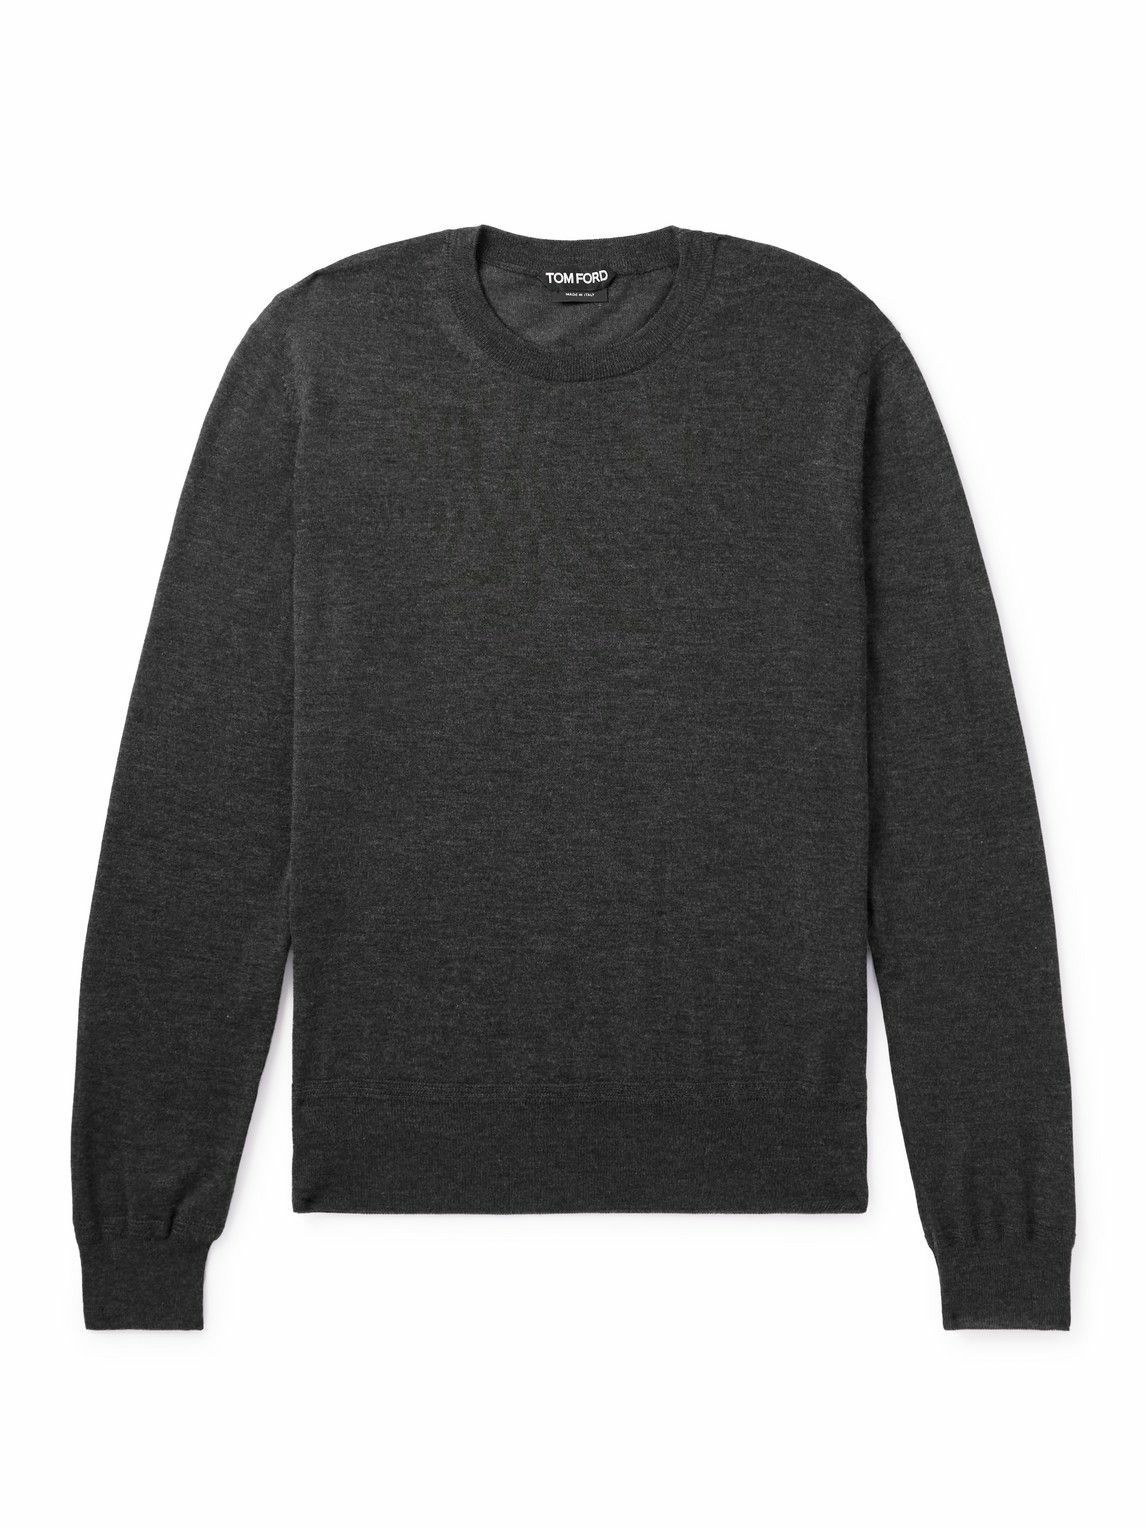 TOM FORD - Slim-Fit Cashmere and SIlk-Blend Sweater - Gray TOM FORD